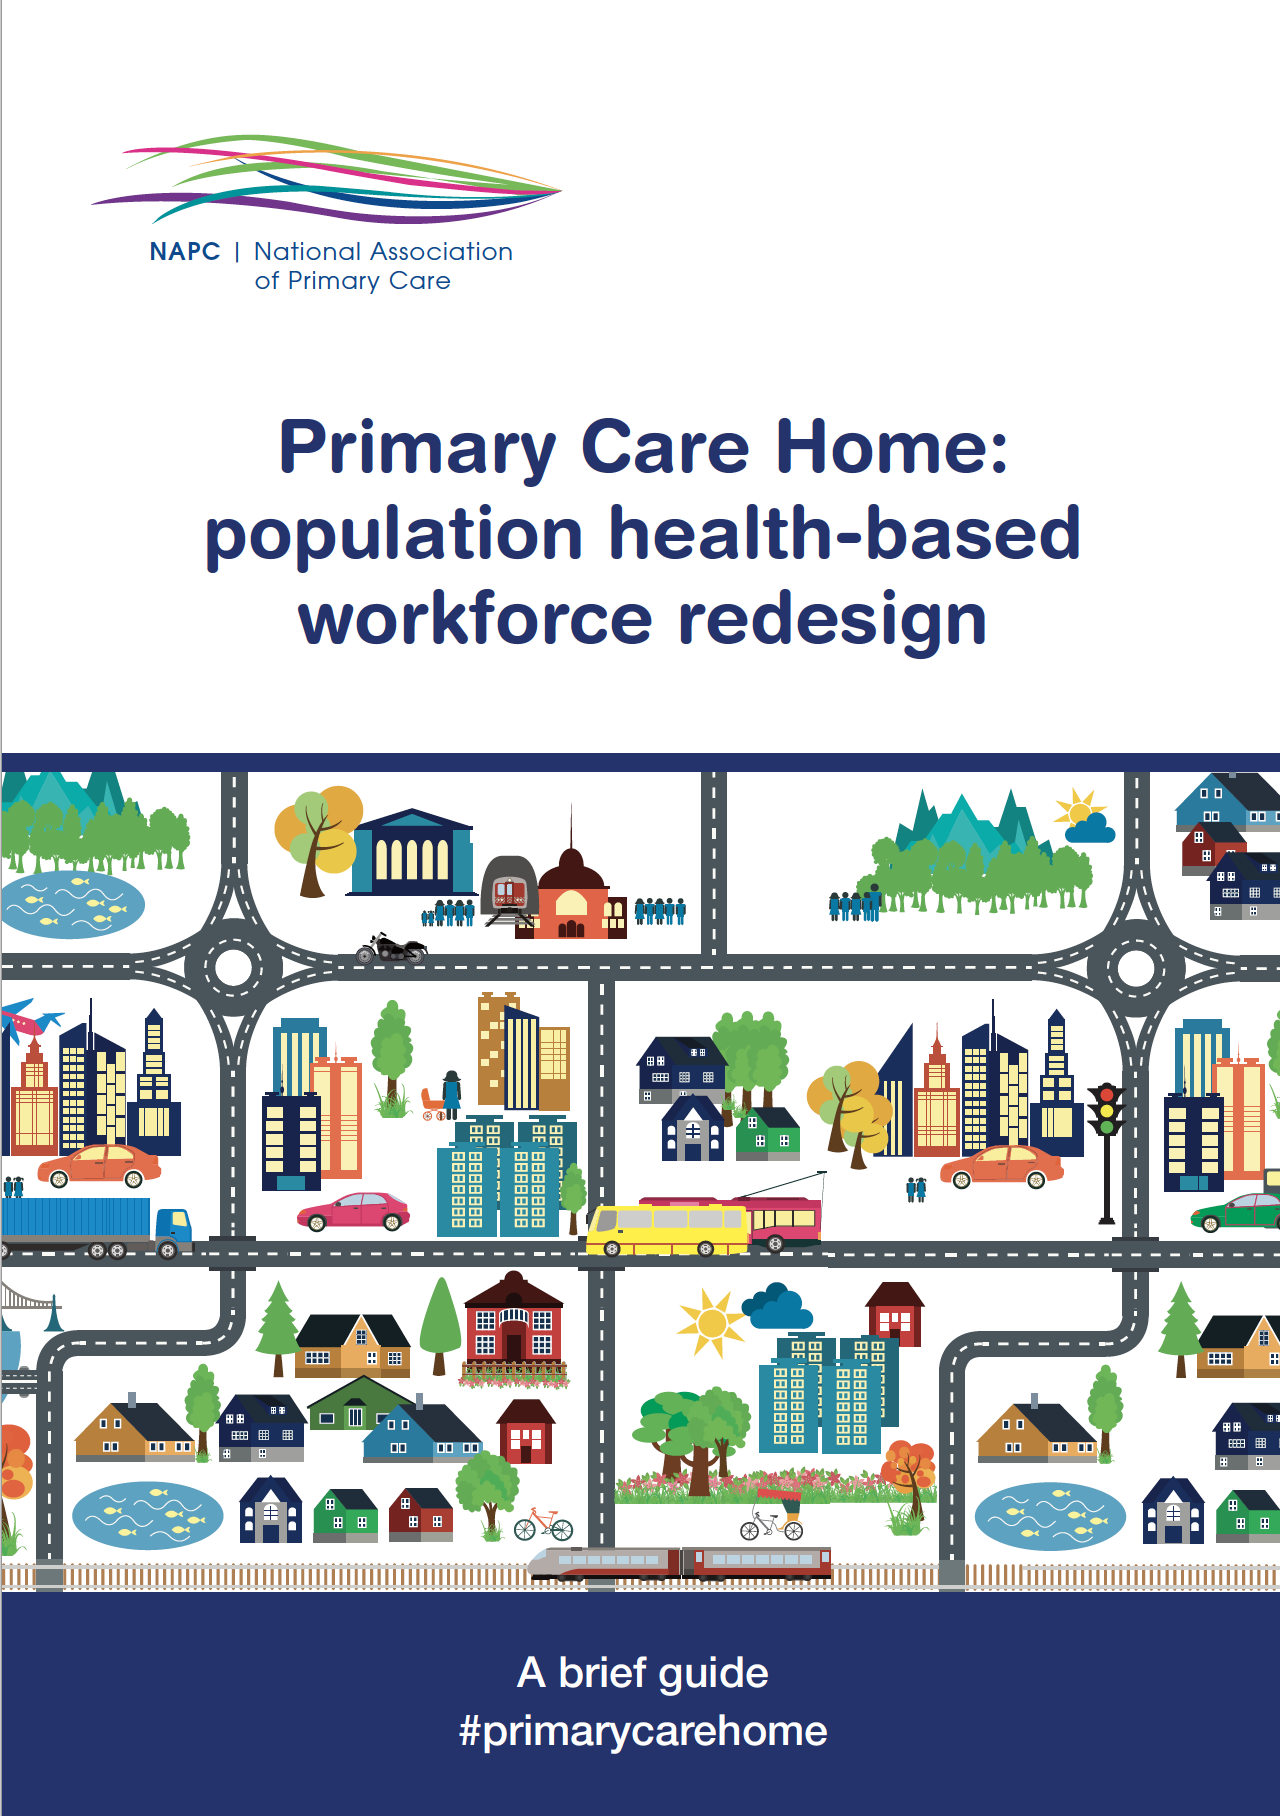 Primary Care Home workforce redesign booklet